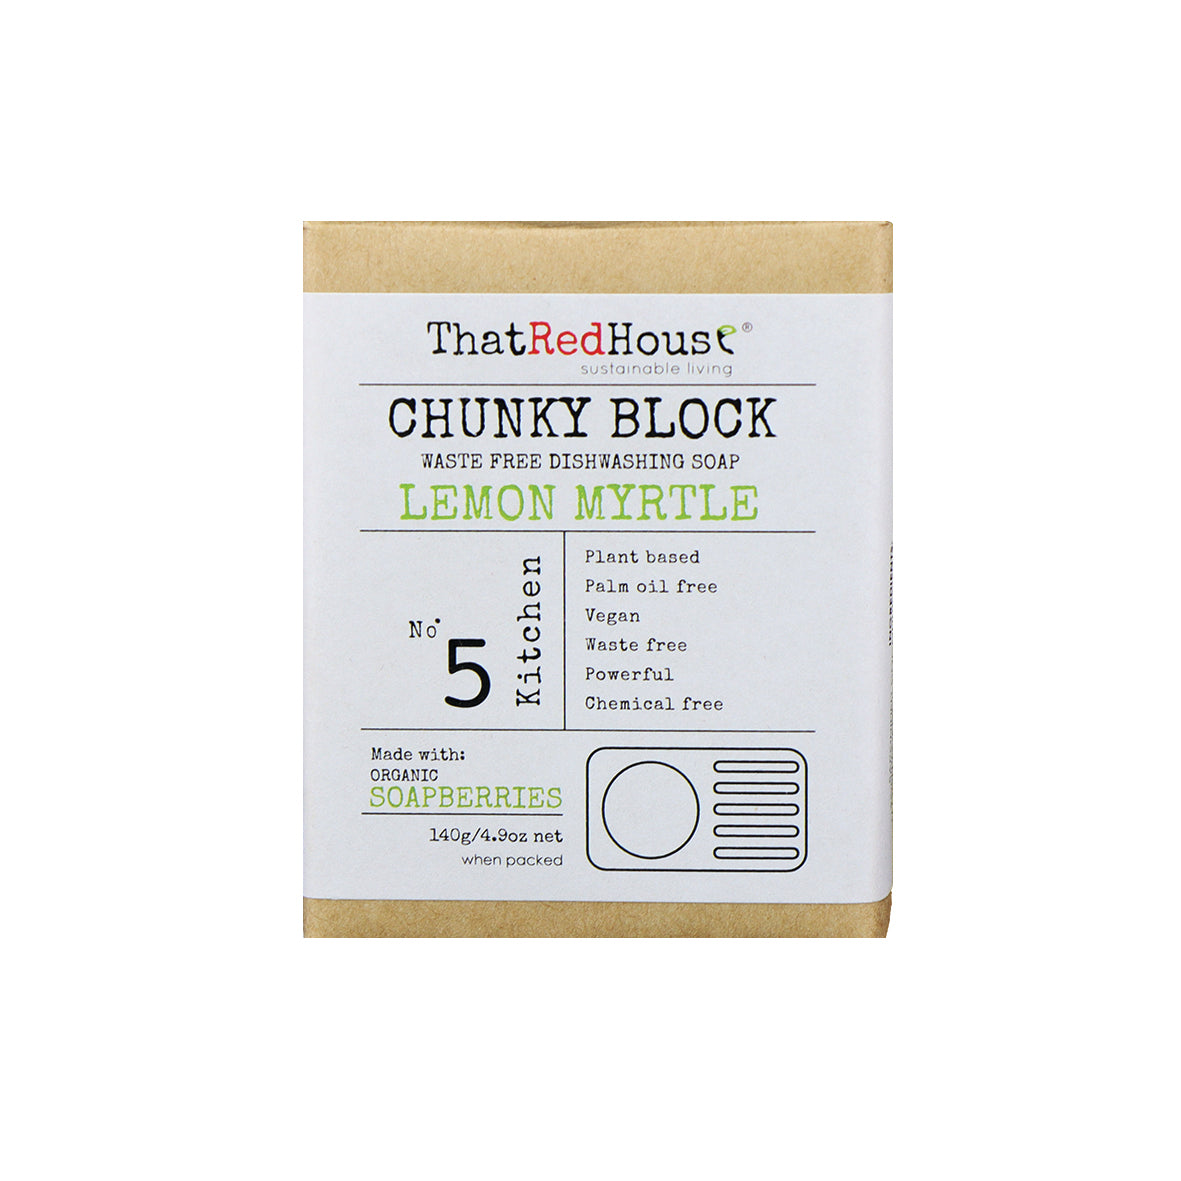 The red house chunky block waste free dishwashing soap lemon myrtle in packaging